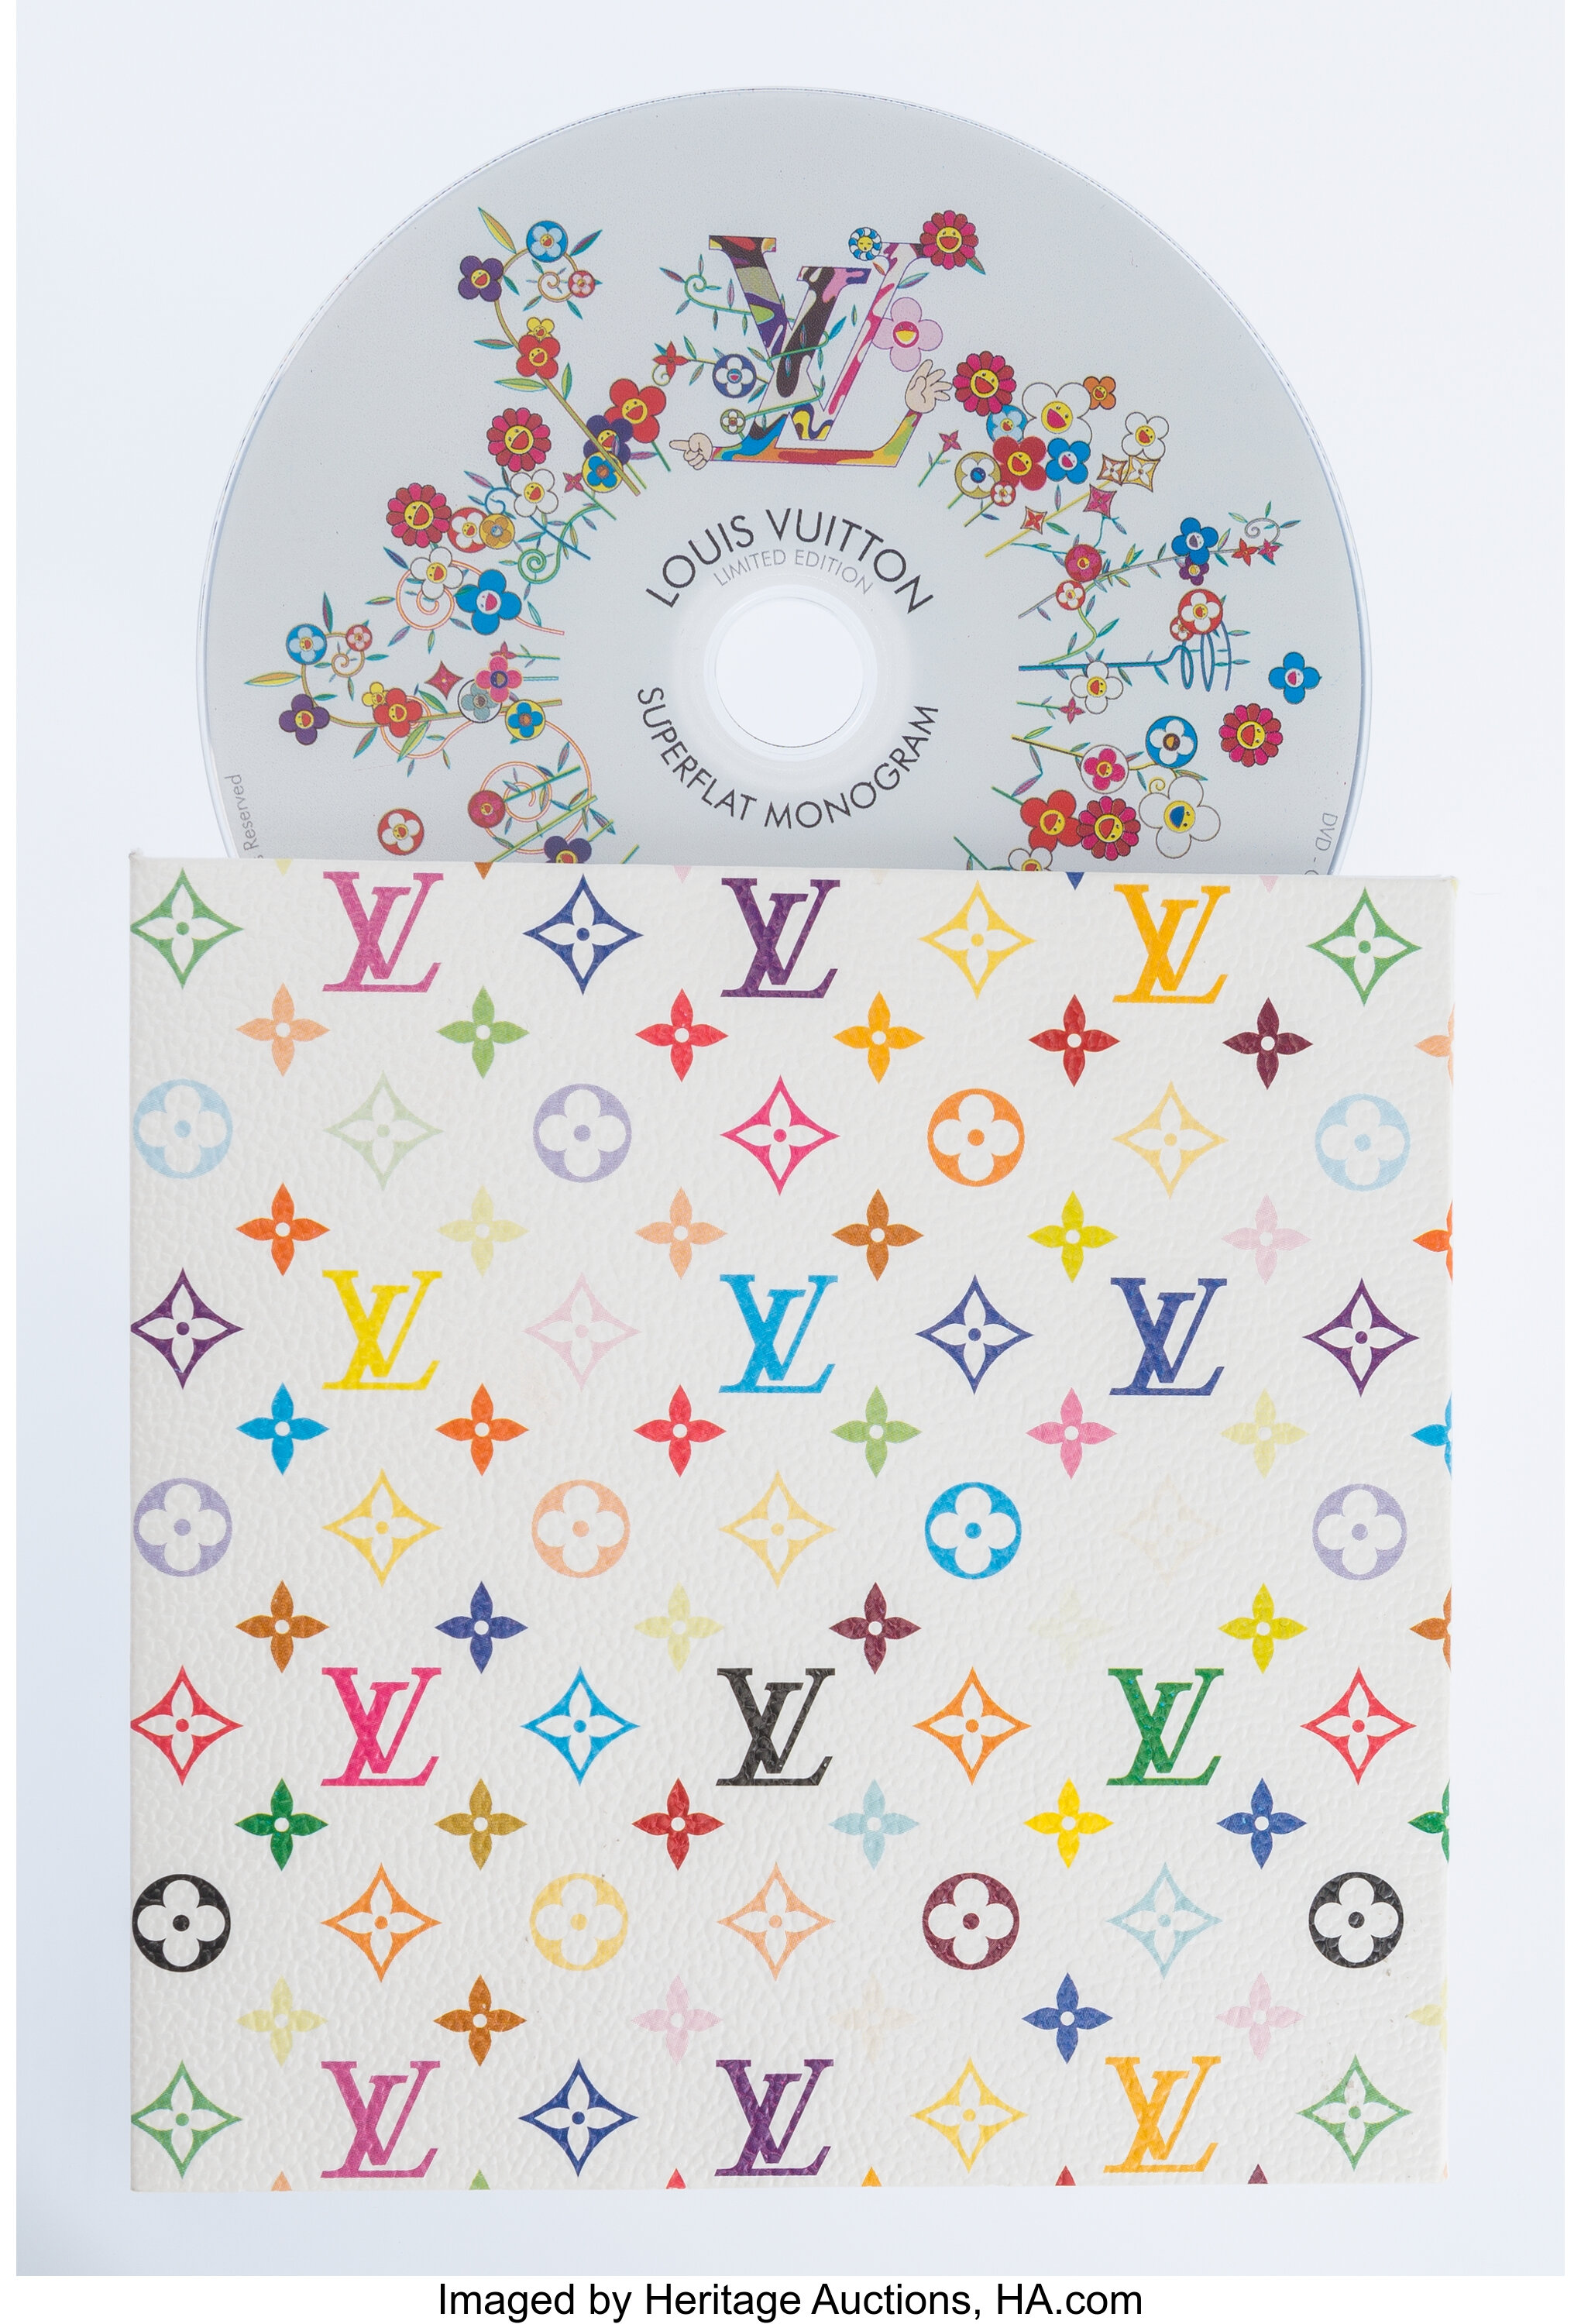 Takashi Murakami X Louis Vuitton - Auction Results and Sales Data